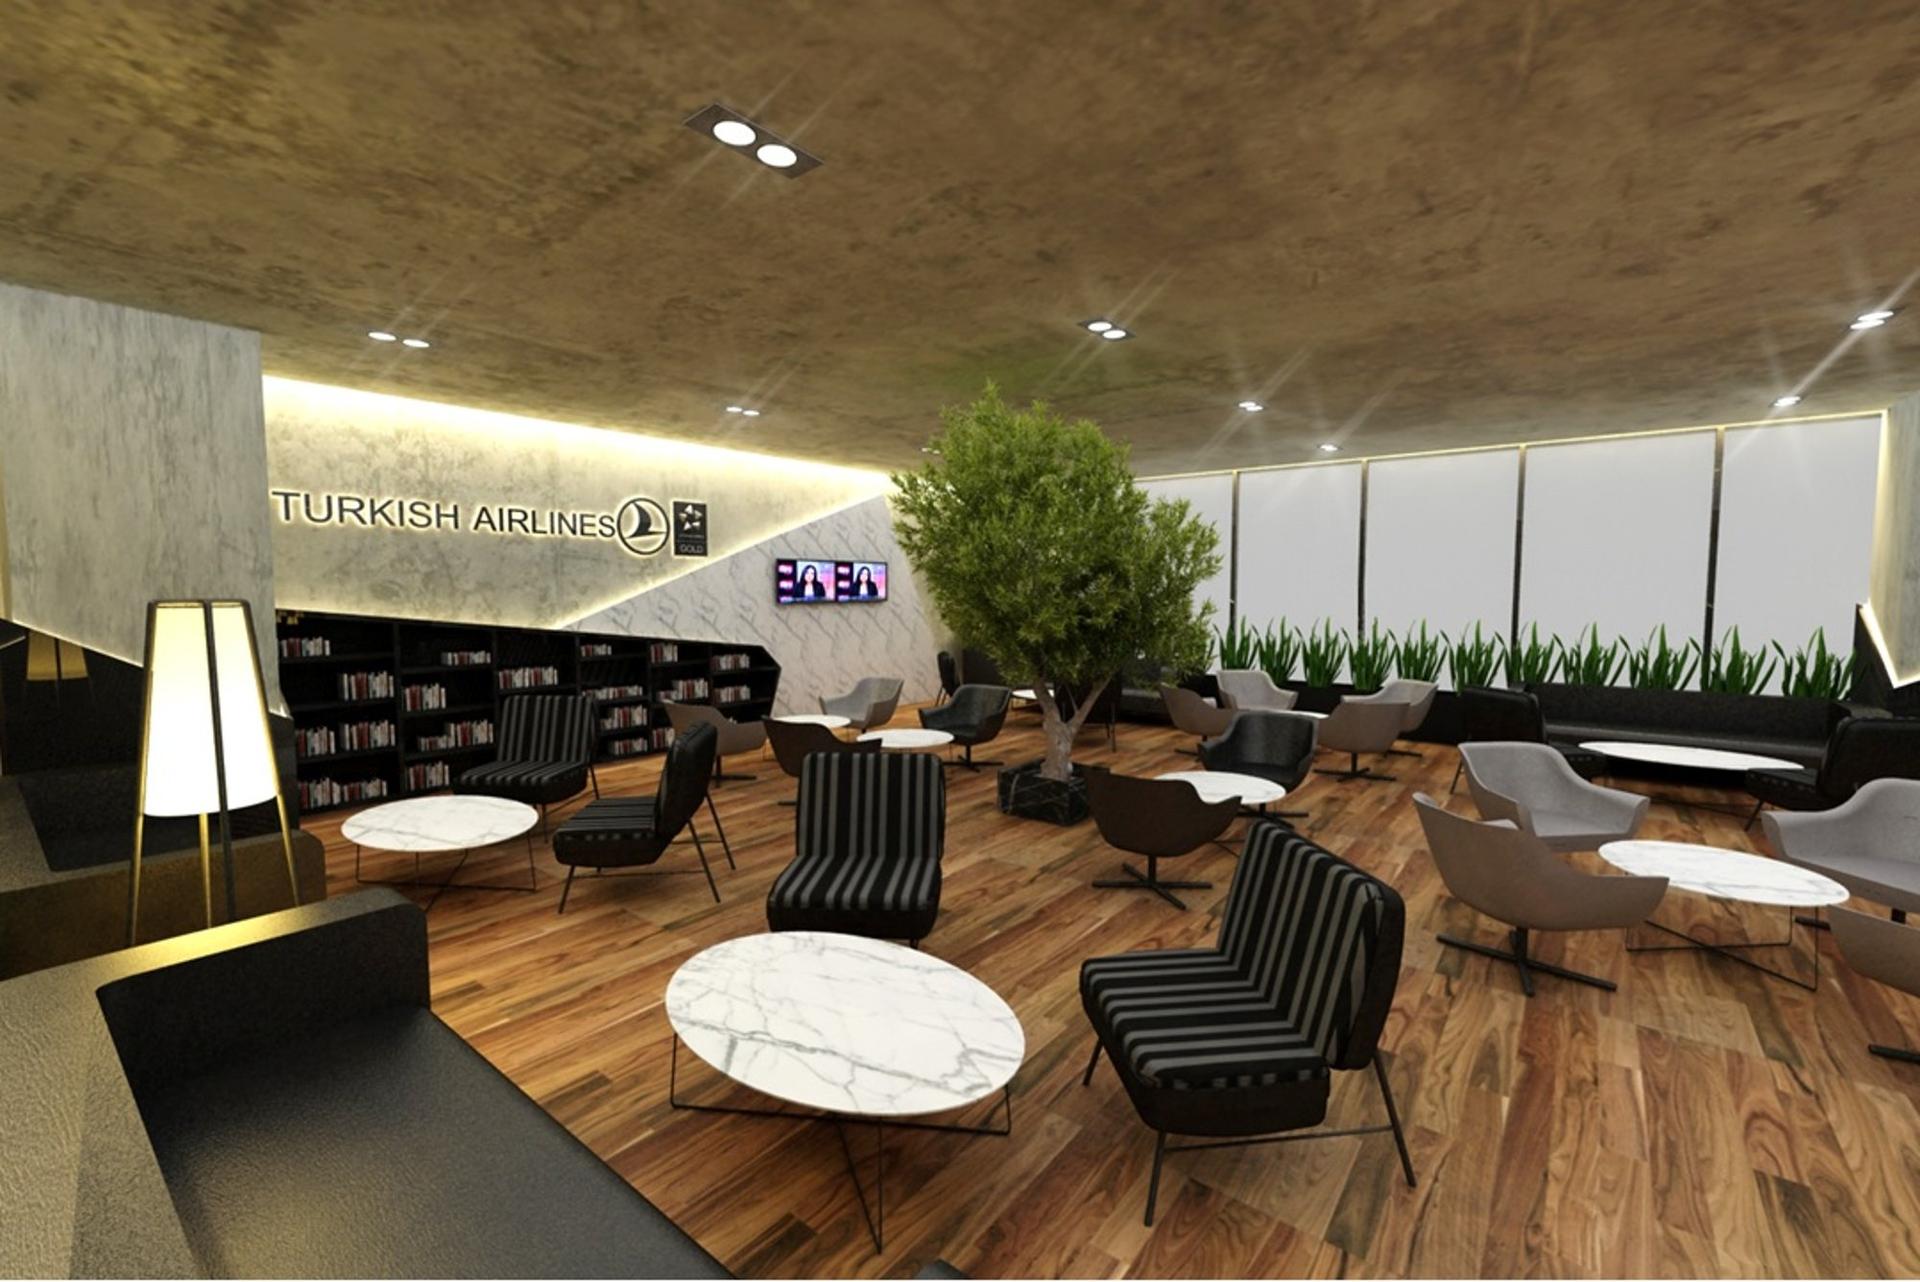 Turkish Airlines CIP Lounge (Business Lounge) image 20 of 27